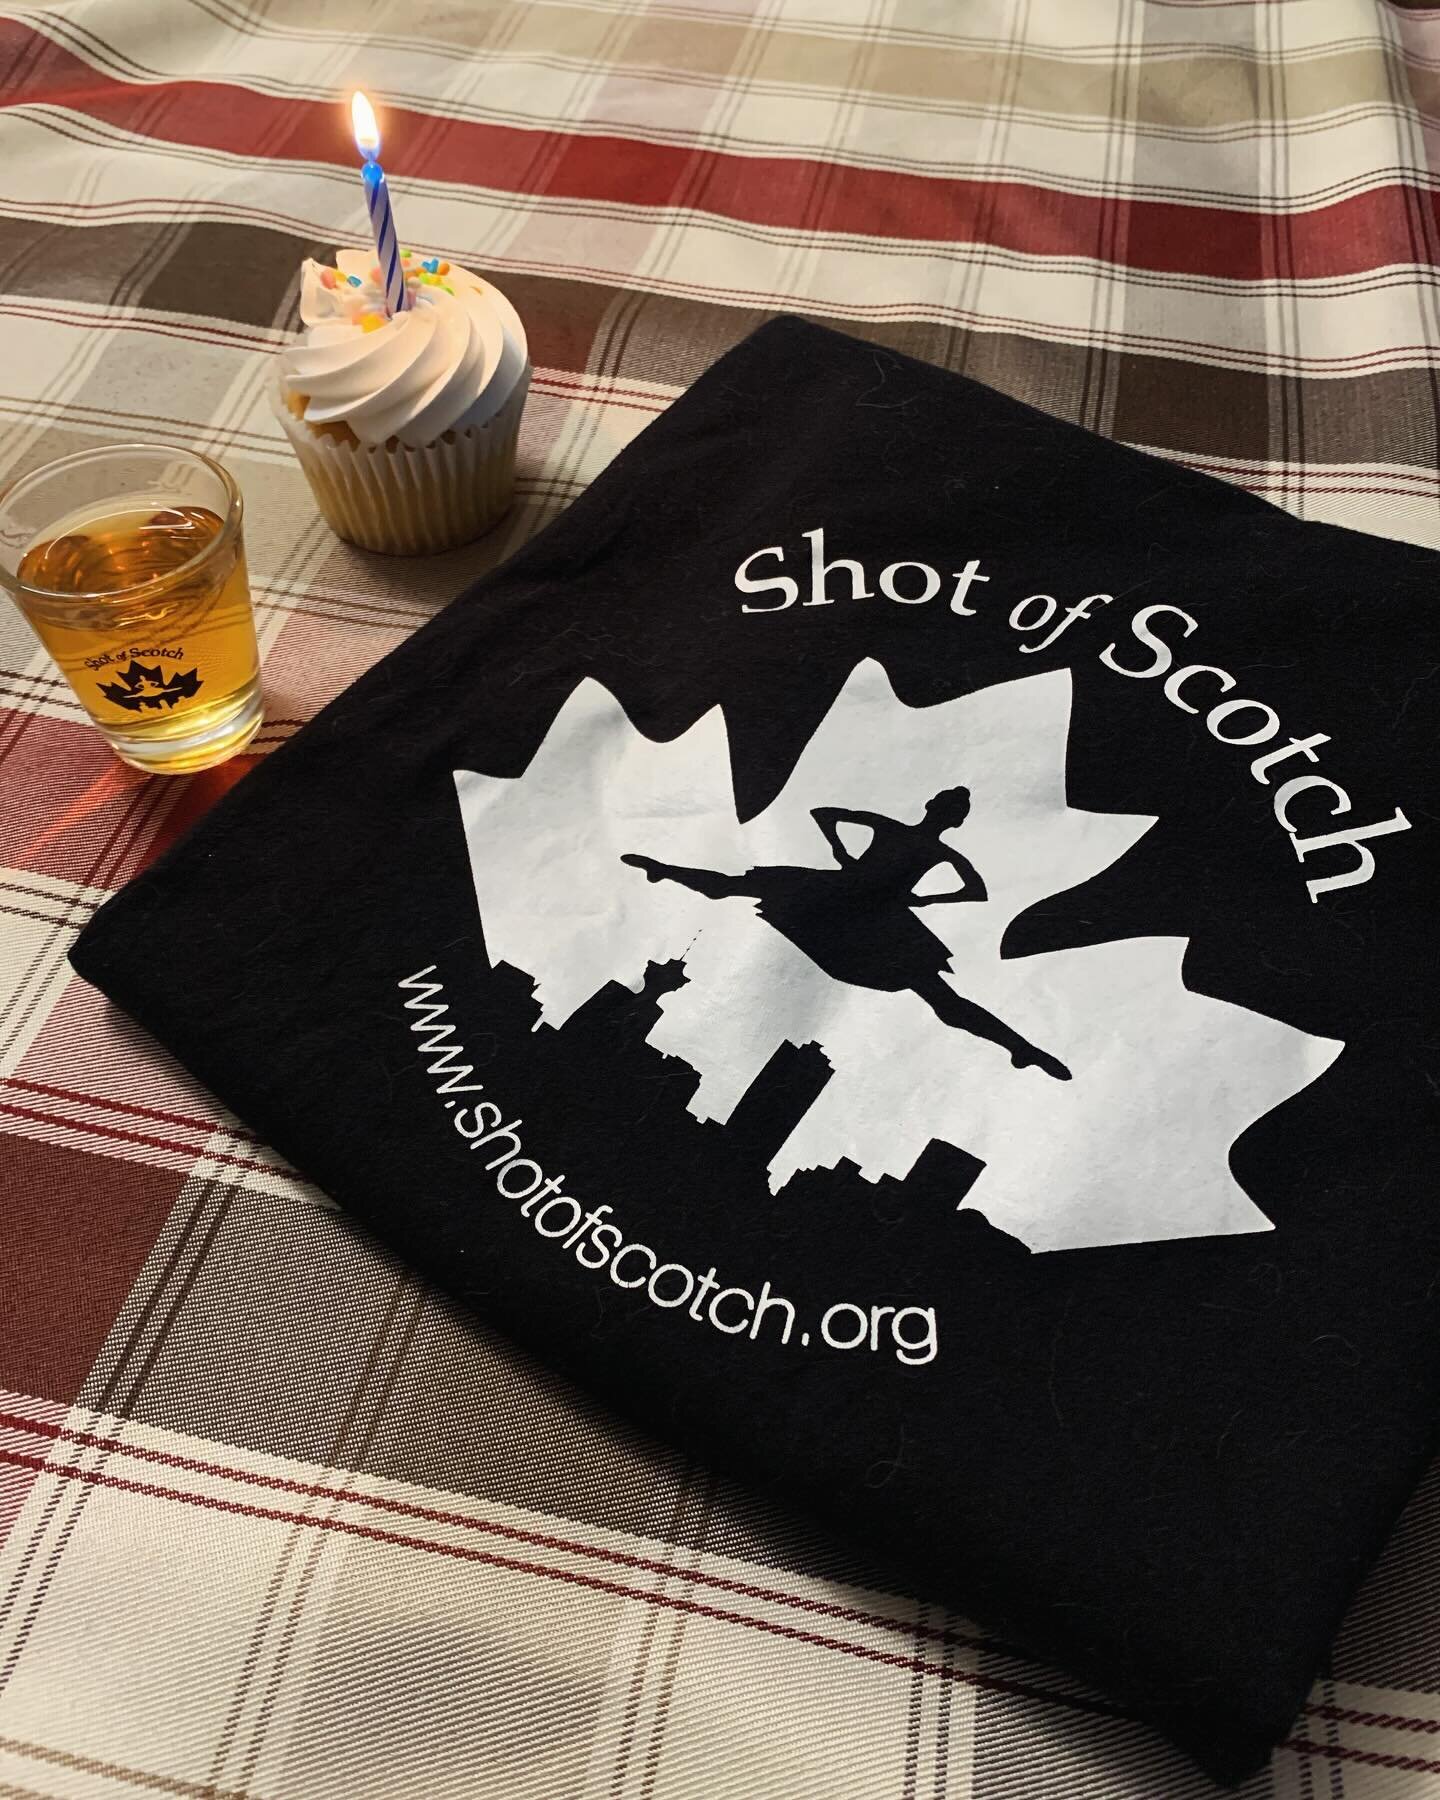 🎉 Celebrating 11 amazing years of Shot of Scotch Vancouver! 🎈

From our first steps to this milestone, it&rsquo;s been an incredible journey filled with passion, perseverance, and of course, the joy of Highland dance! 🏴󠁧󠁢󠁳󠁣󠁴󠁿💃

To all our d